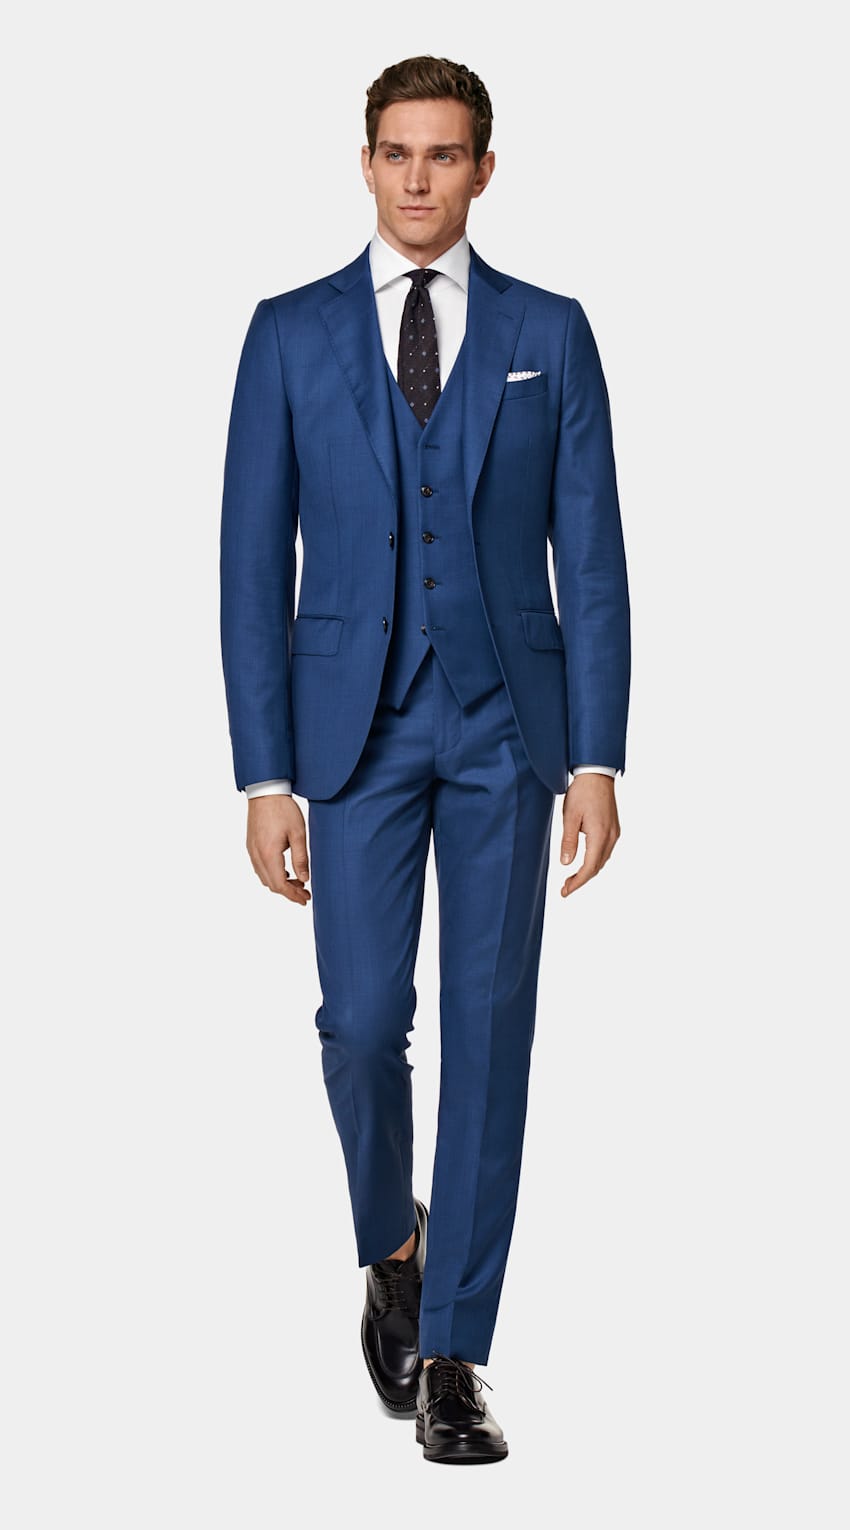 SUITSUPPLY Pure Wool S110's by Vitale Barberis Canonico, Italy Mid Blue Three-Piece Lazio Suit